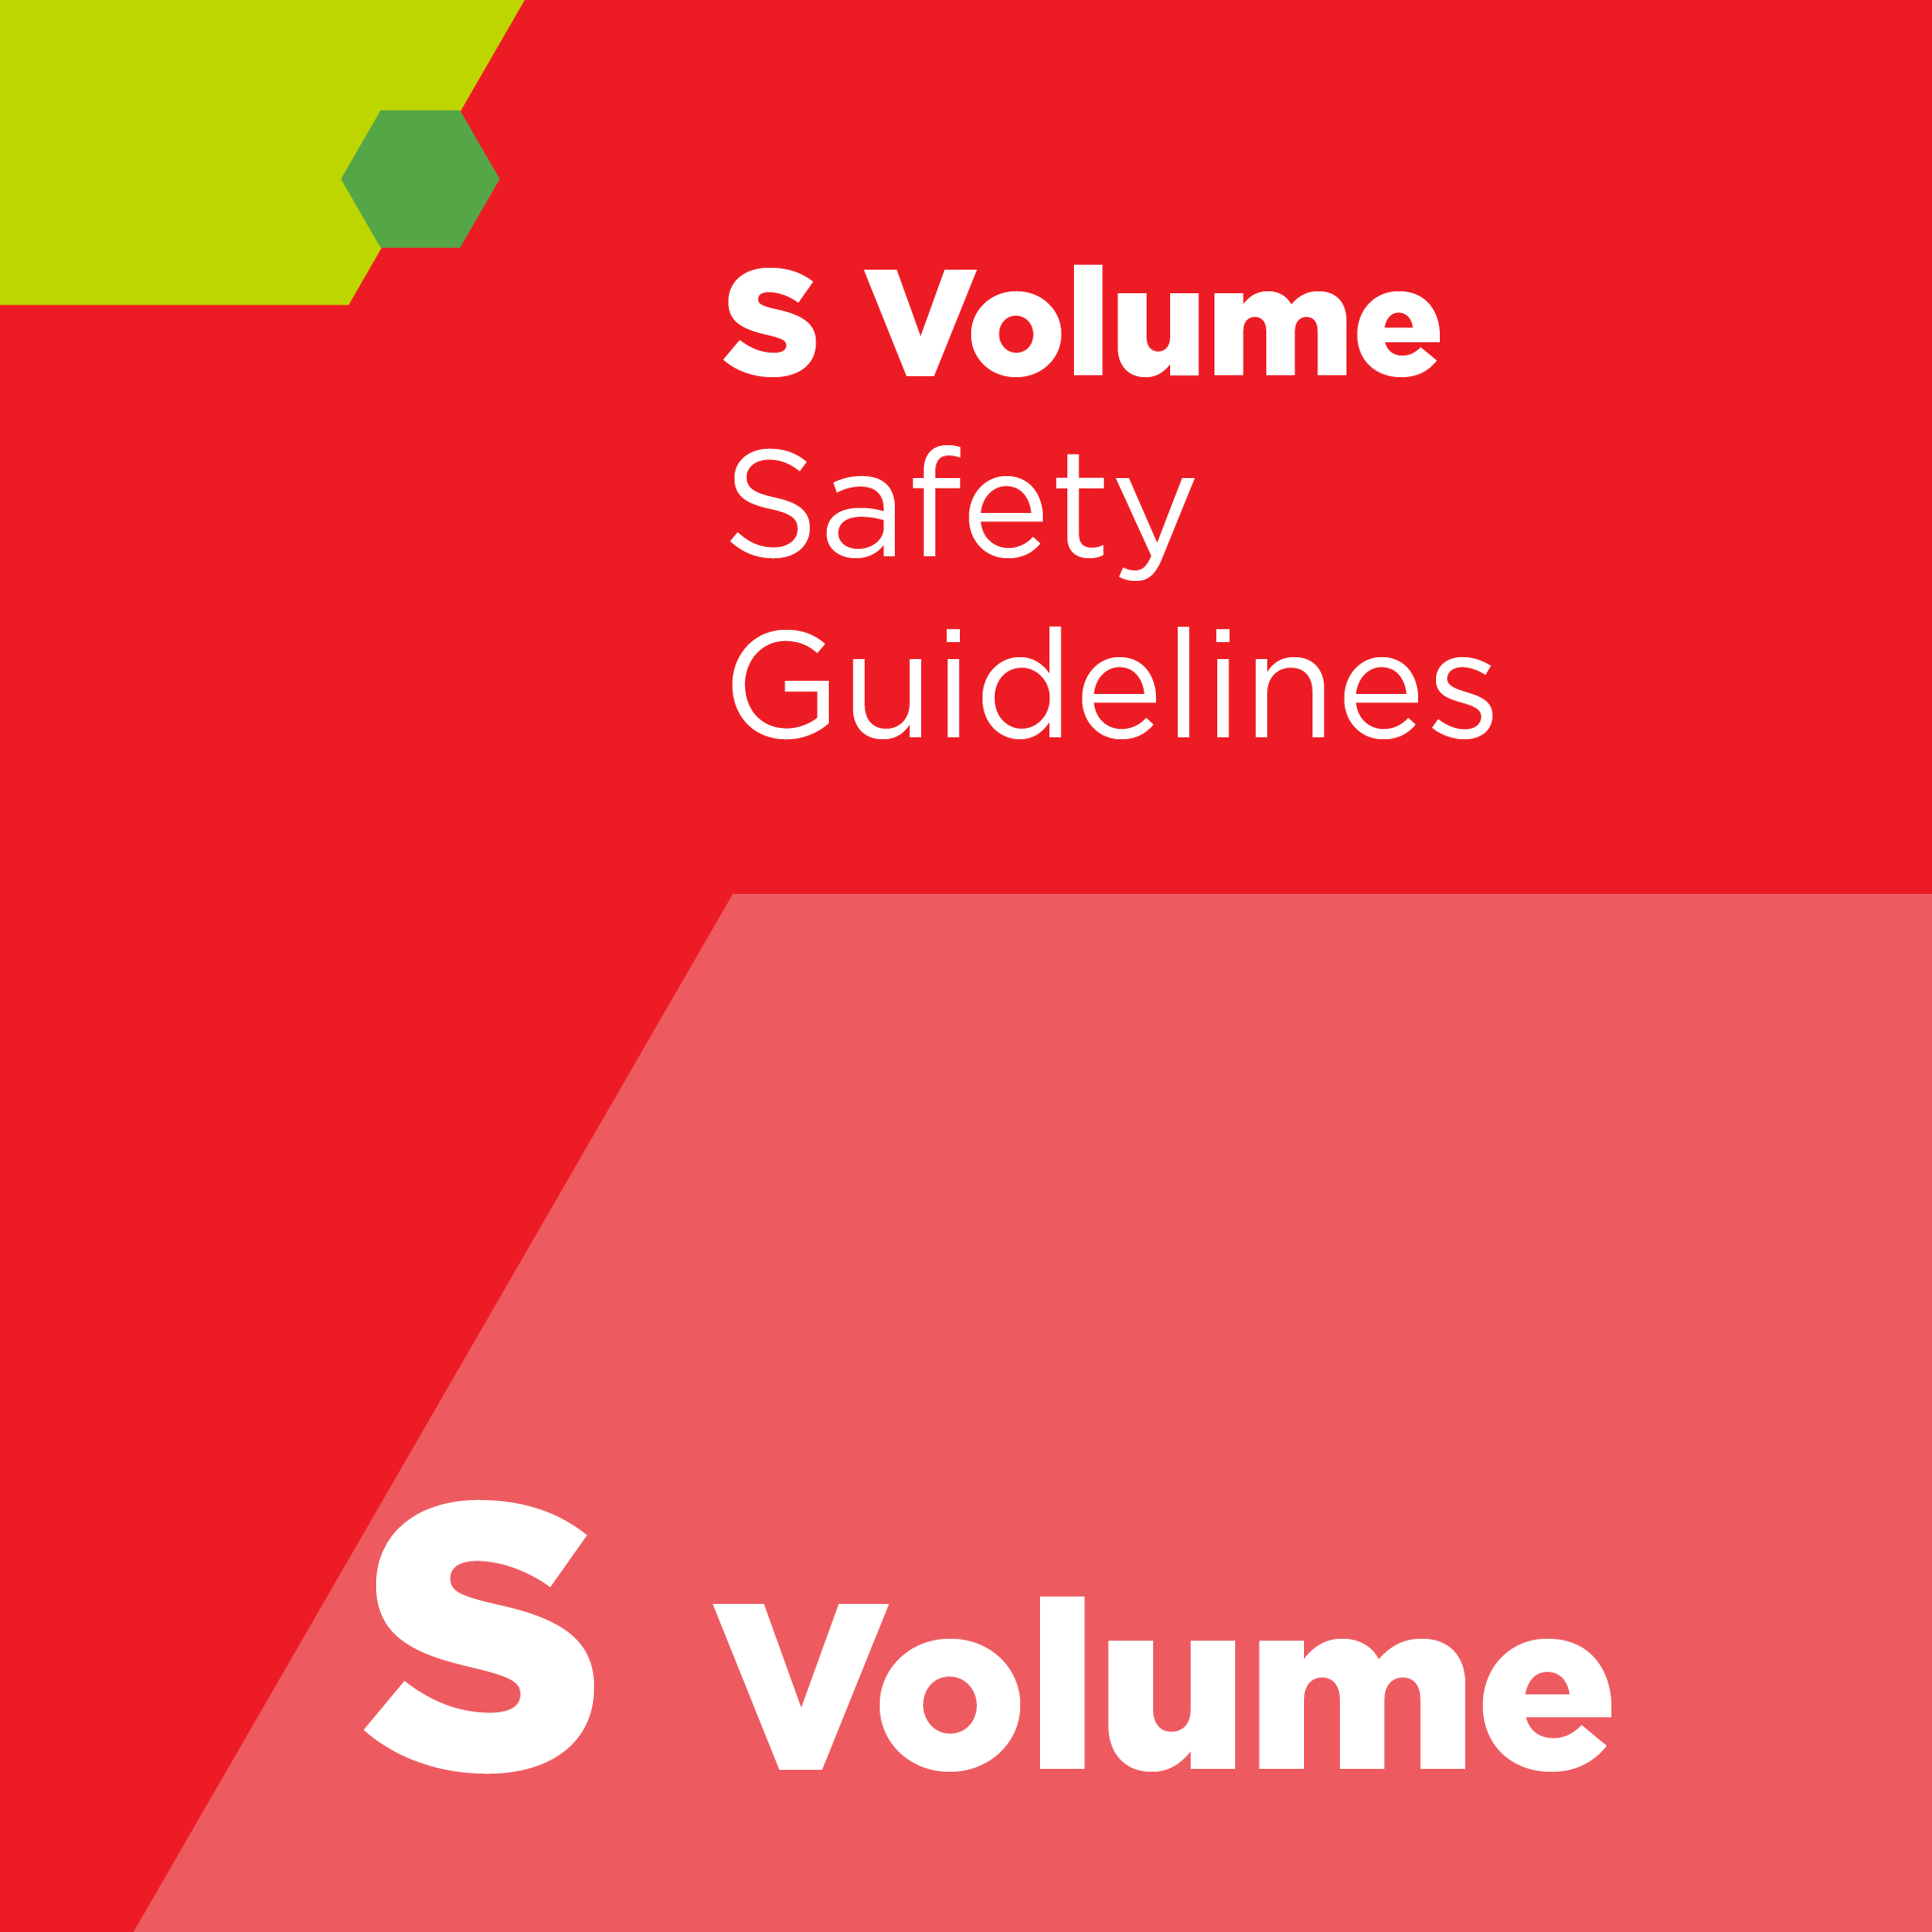 S01800 - SEMI S18 - Environmental, Health and Safety Guideline for Flammable Silicon Compounds